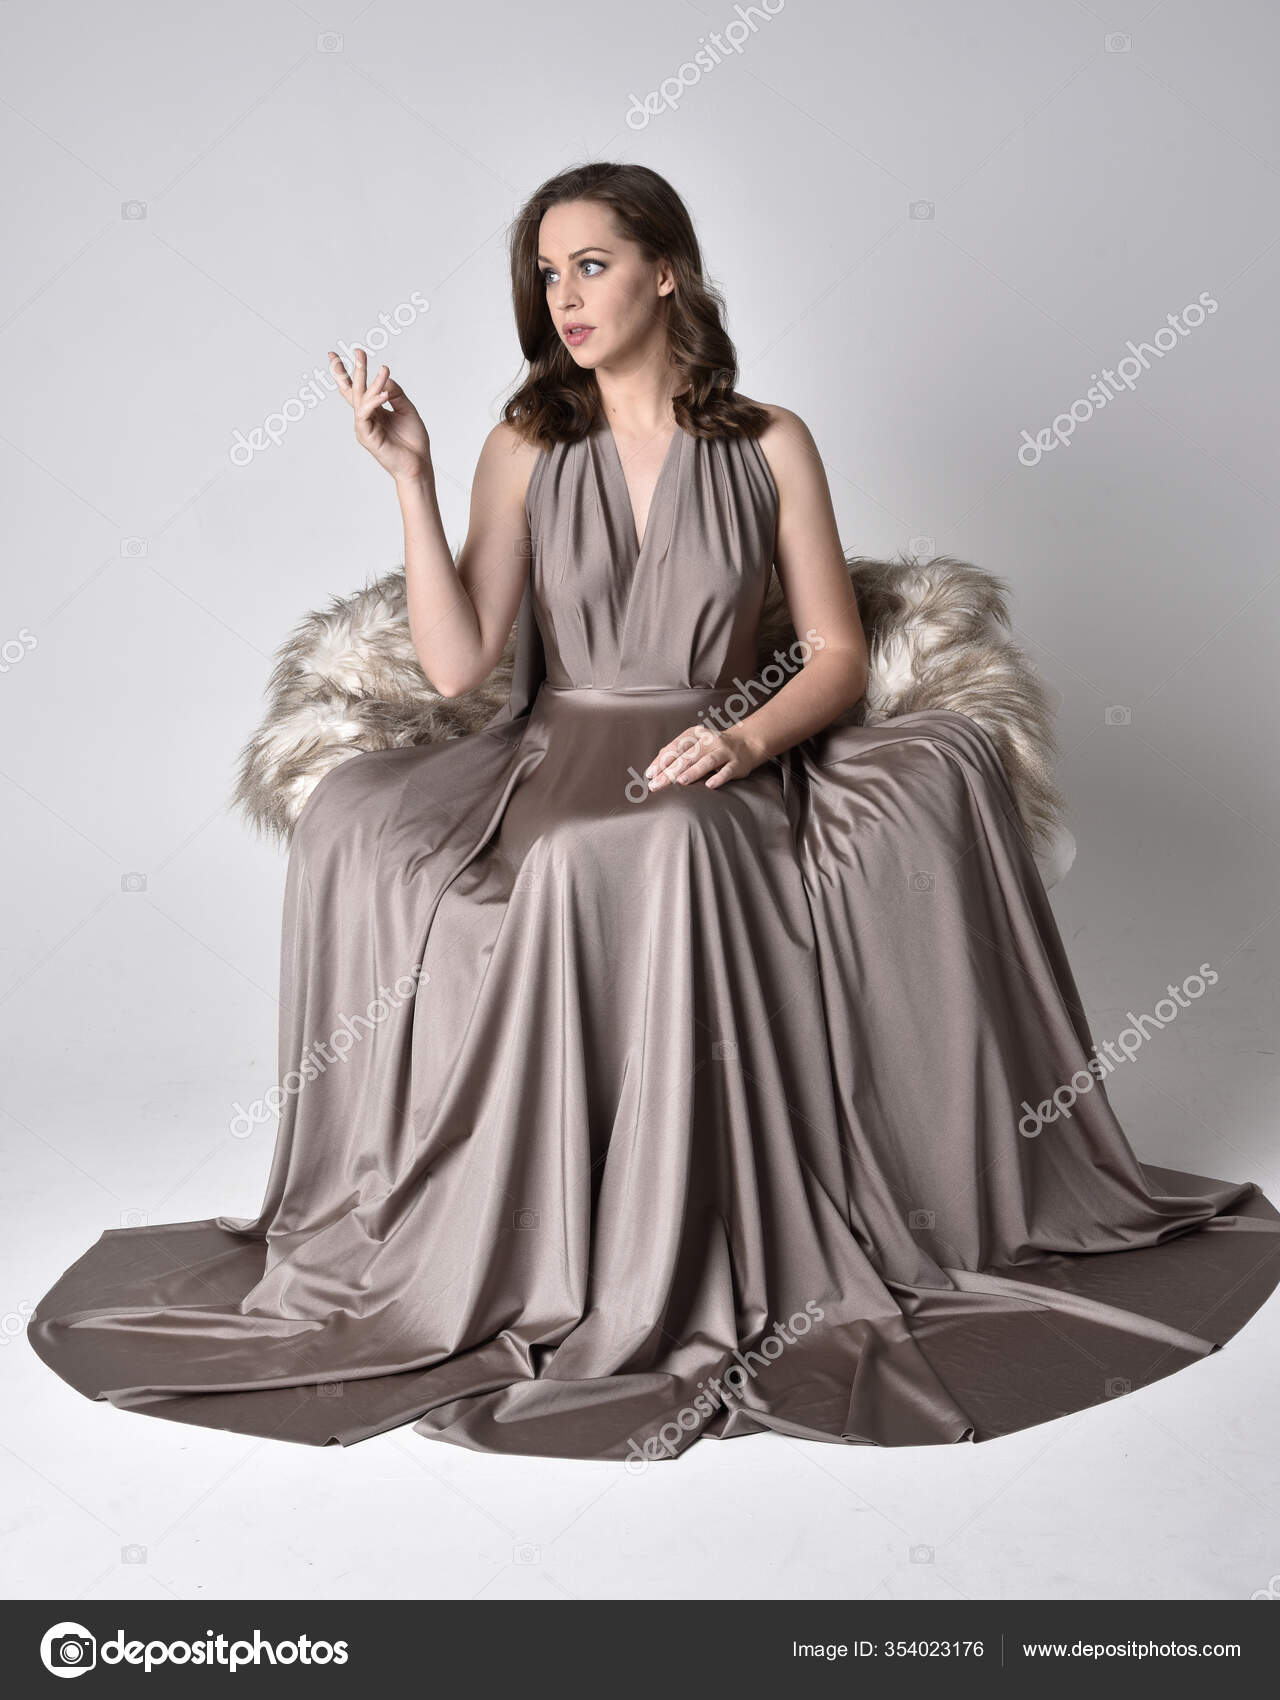 Woman in Long Dress Posing On Gray Textile · Free Stock Photo